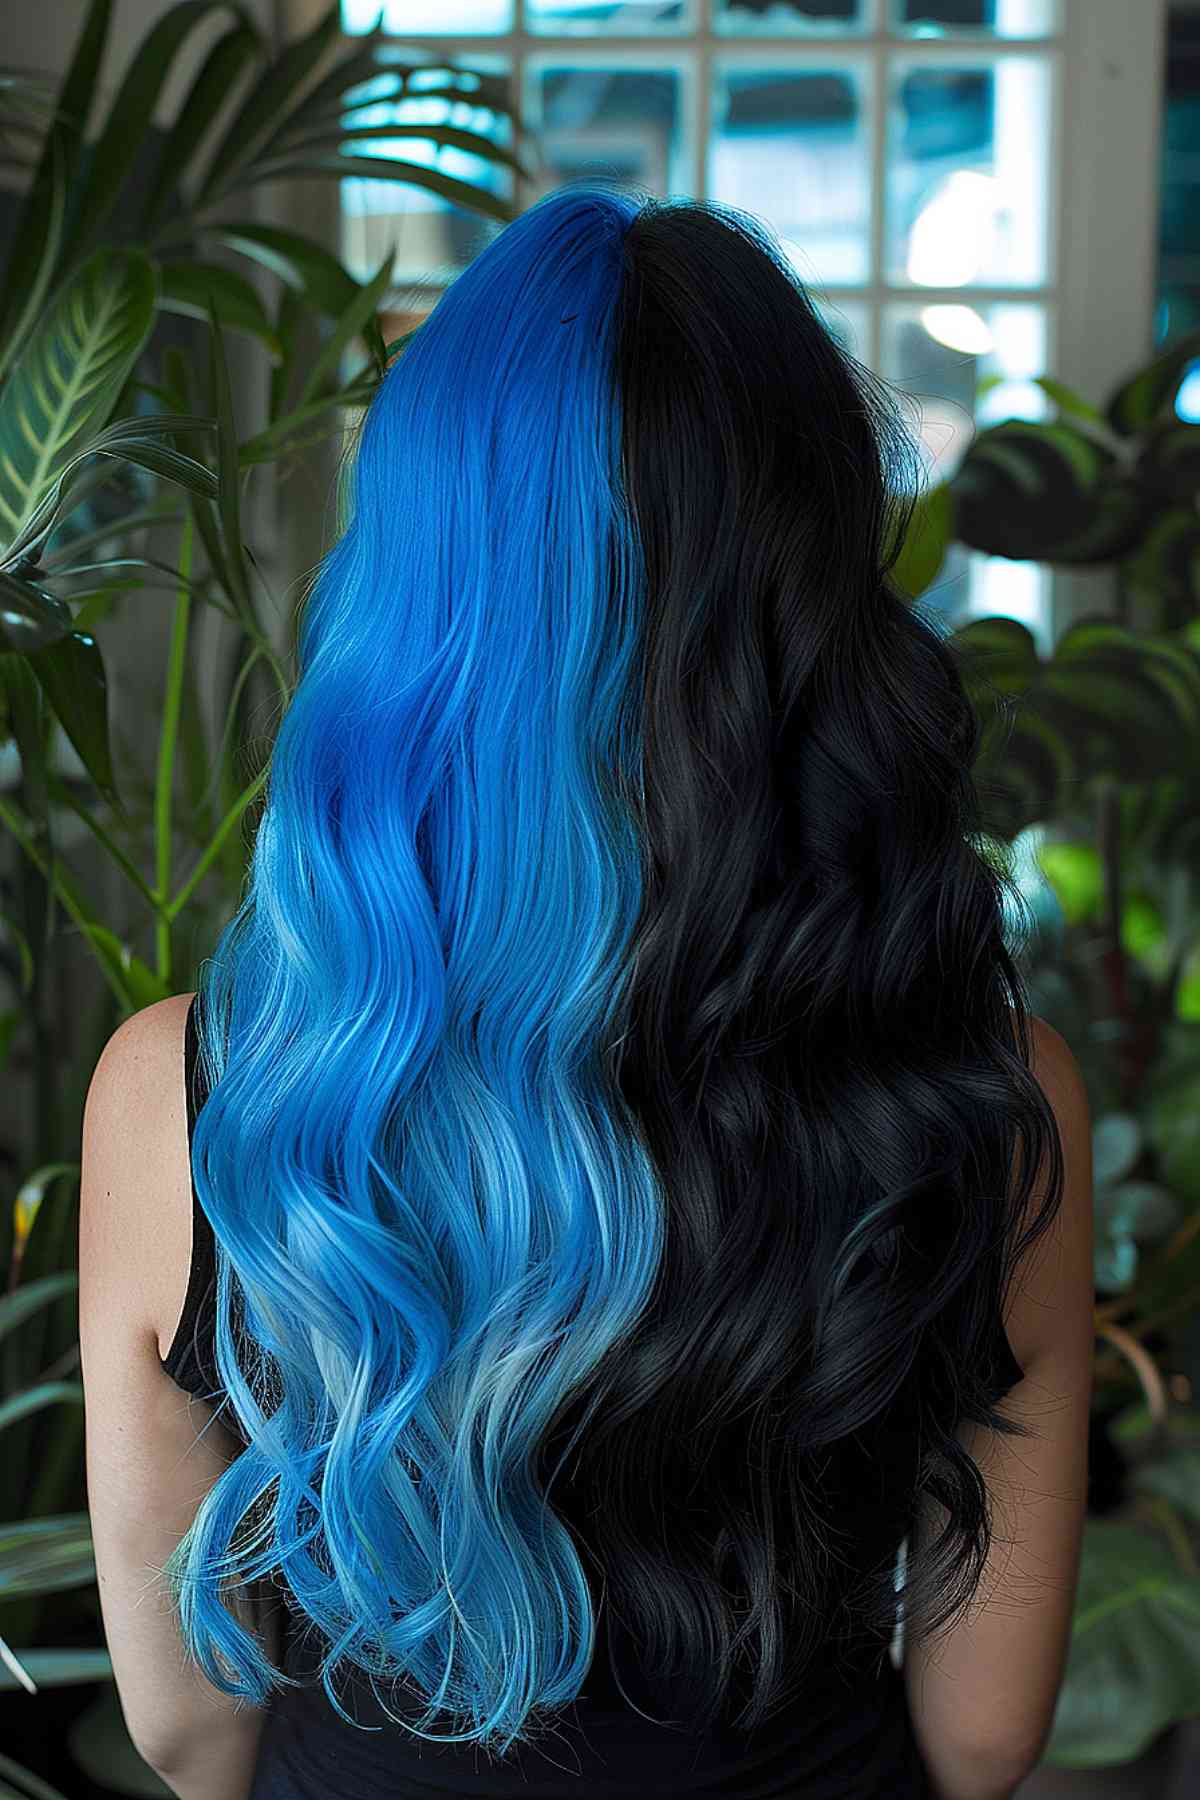 Long wavy hair blending from black to electric blue, reflecting a Gemini's adventurous and contrasting nature.